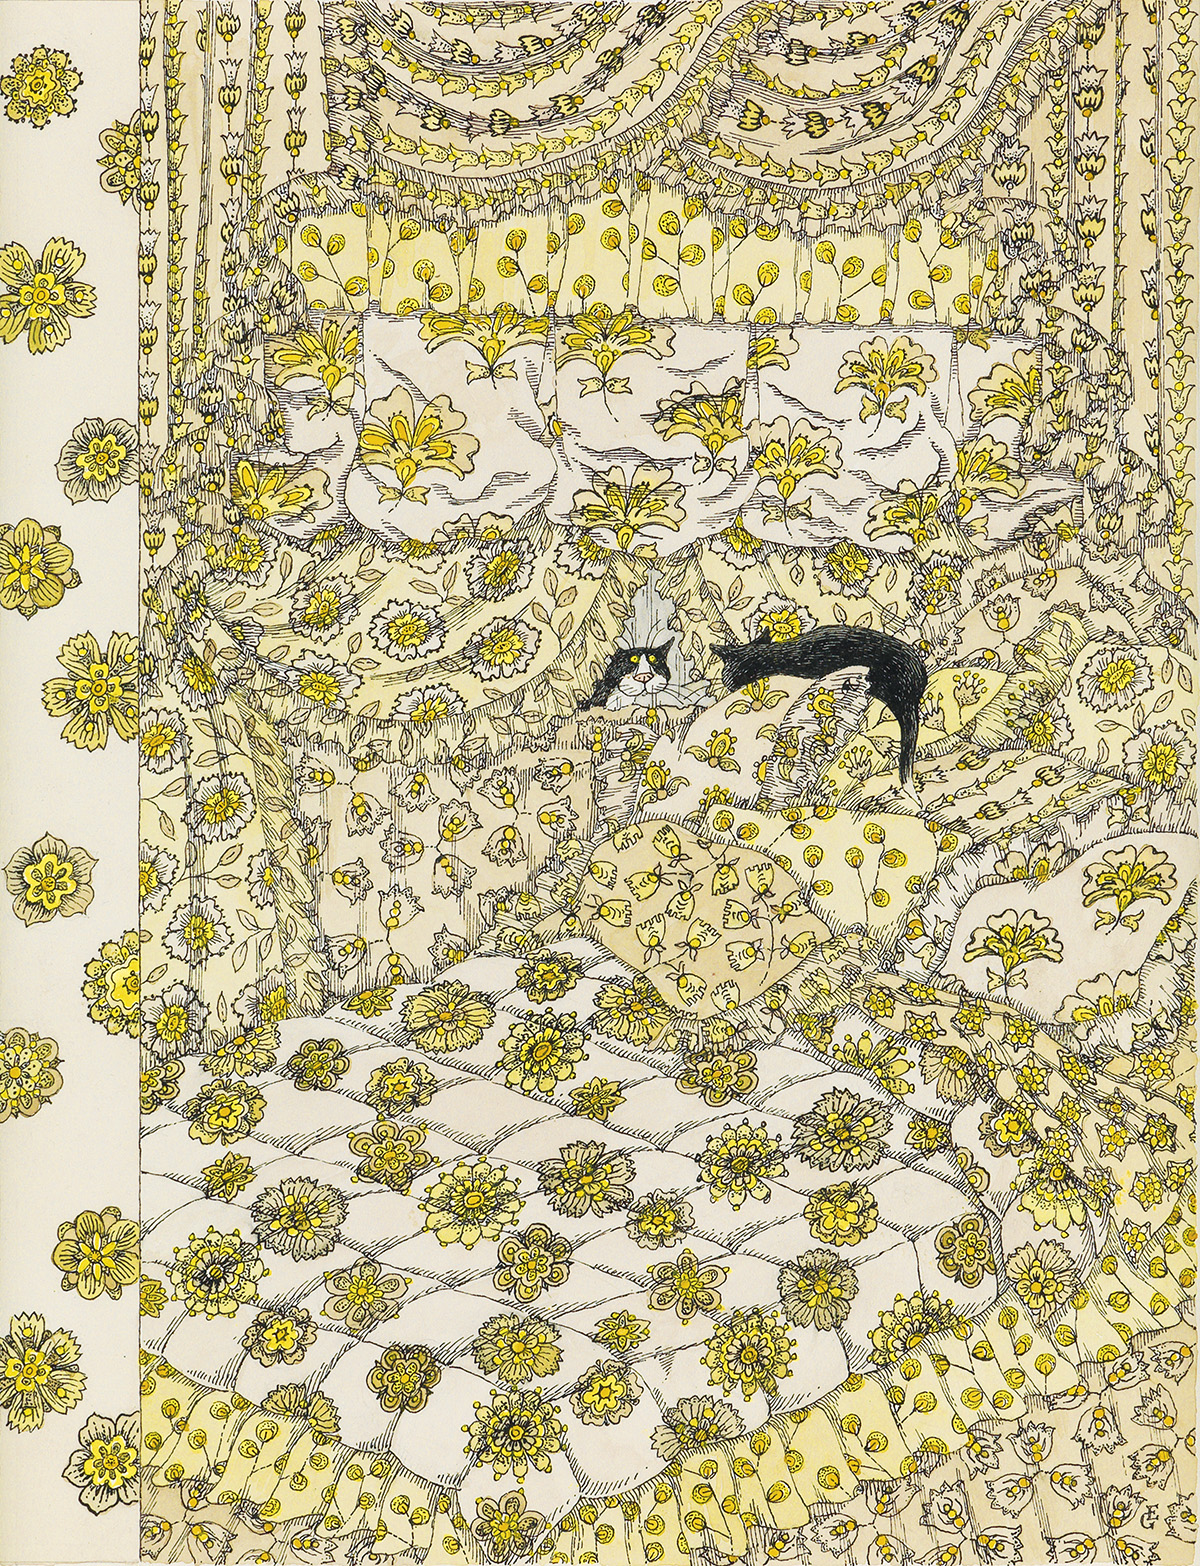 EDWARD GOREY. (THE NEW YORKER / COVER) Cat Fancy.